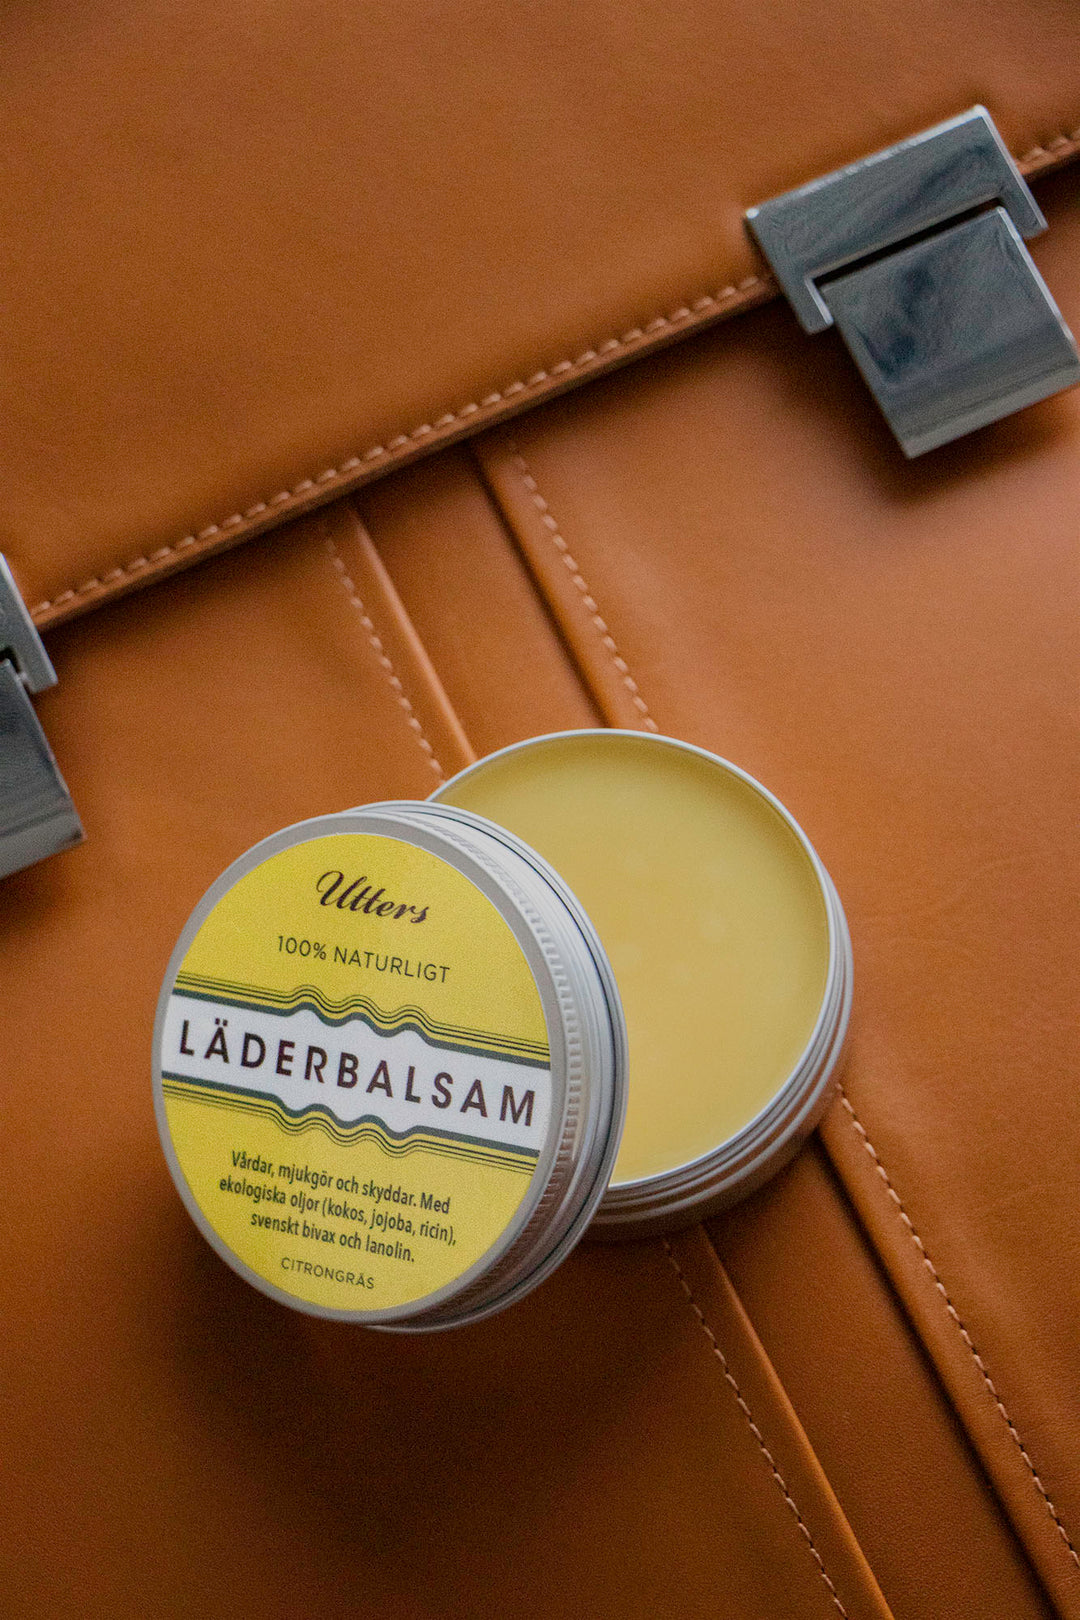 Utter's leather conditioner